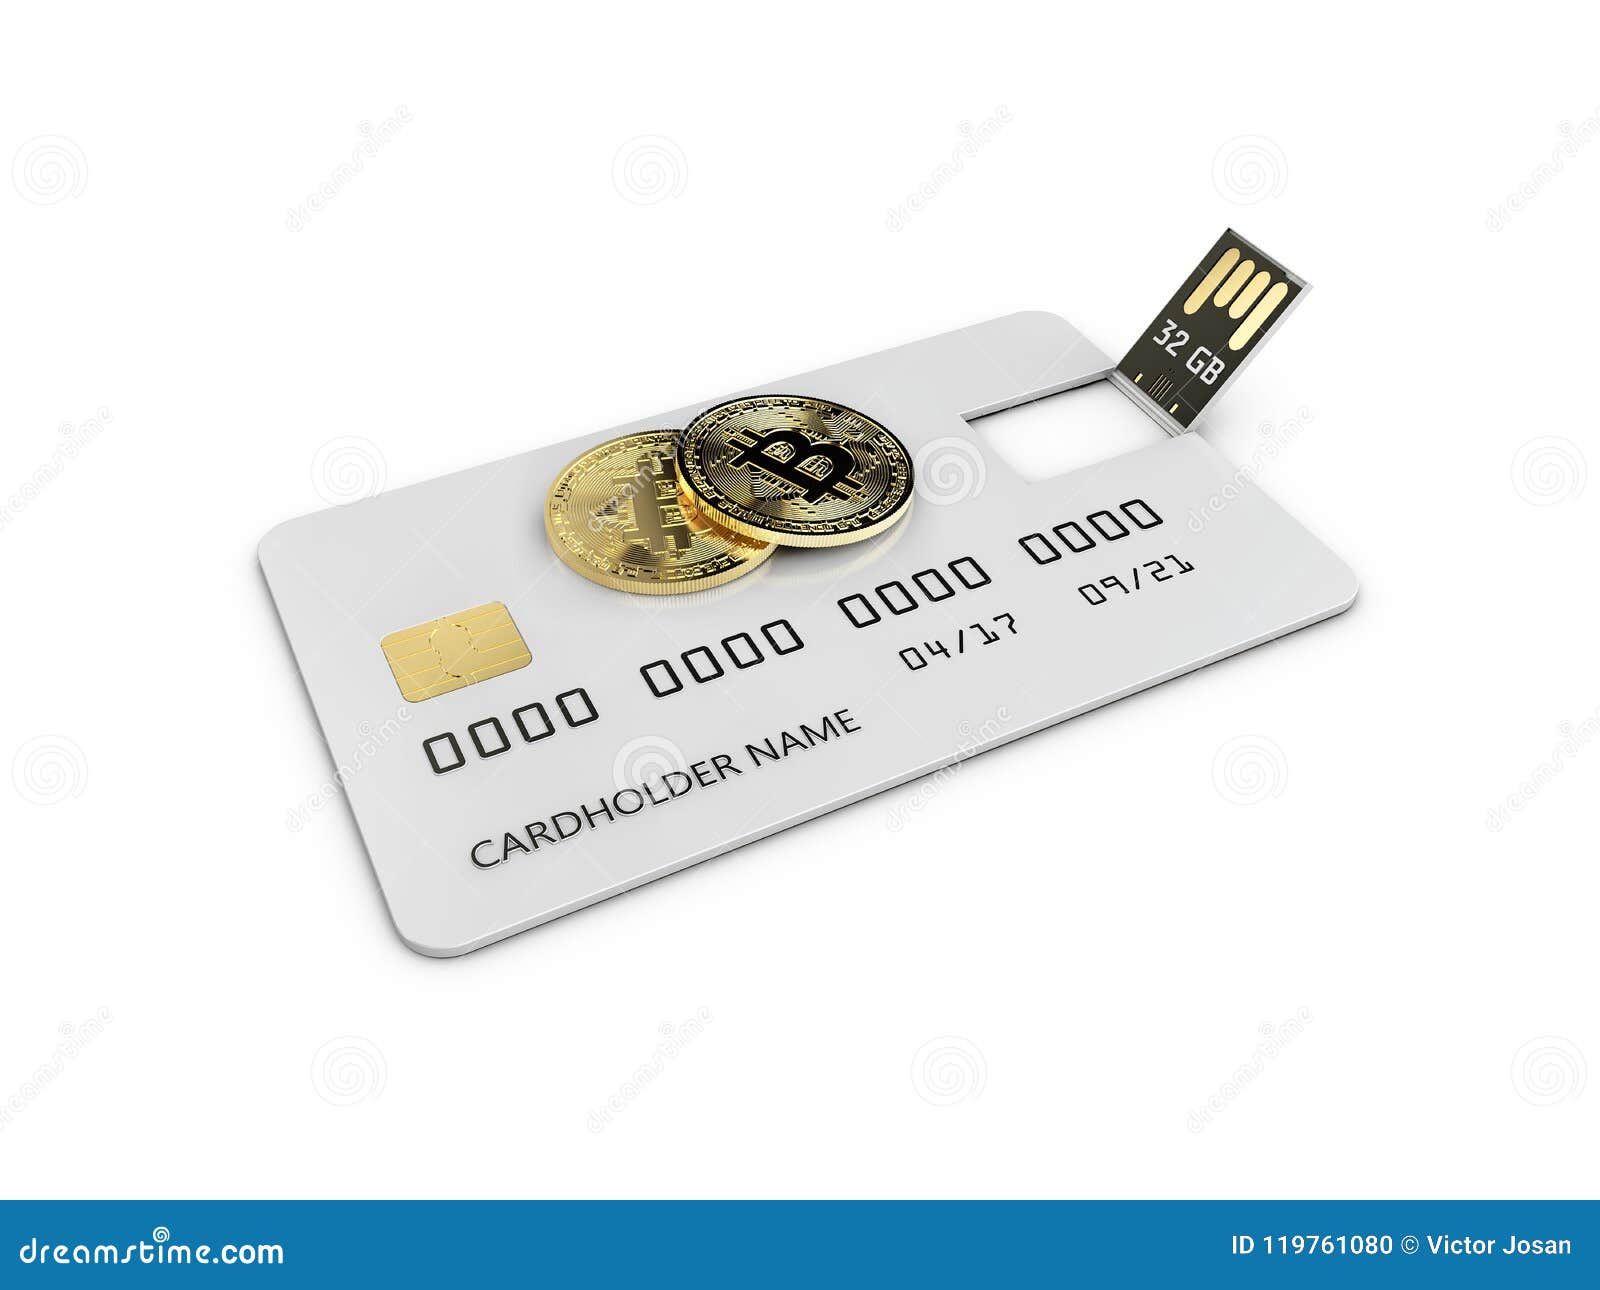 buy 3ds flashcard with bitcoin